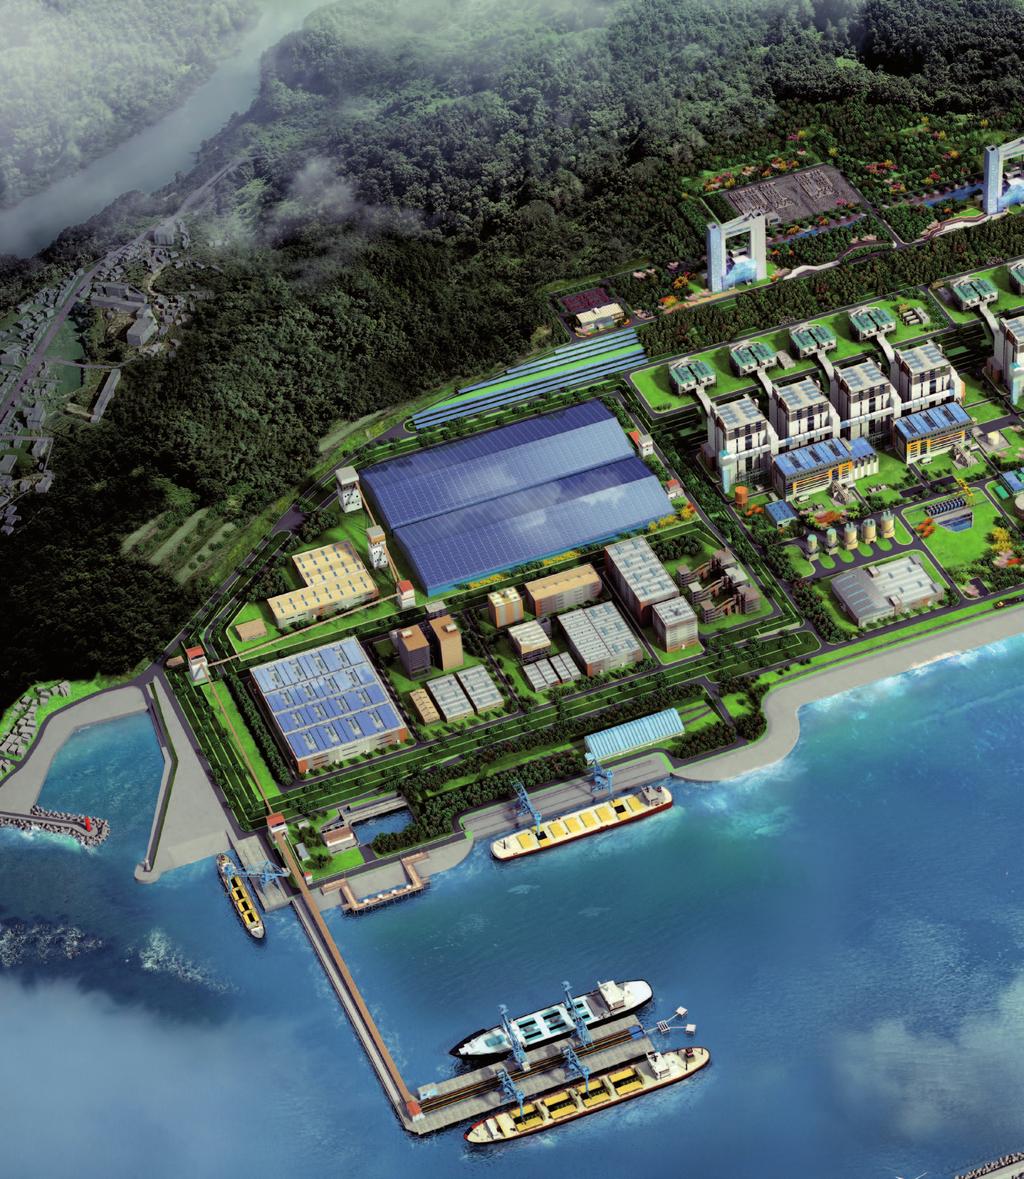 SAMCHEOK GREEN POWER PROJECT MOVING MOUNTAINS FOR GREEN ENERGY WITH FOSTER WHEELER AND KOSPO T he Samcheok Green Power Project is one of the world s most ambitious energy complexes.